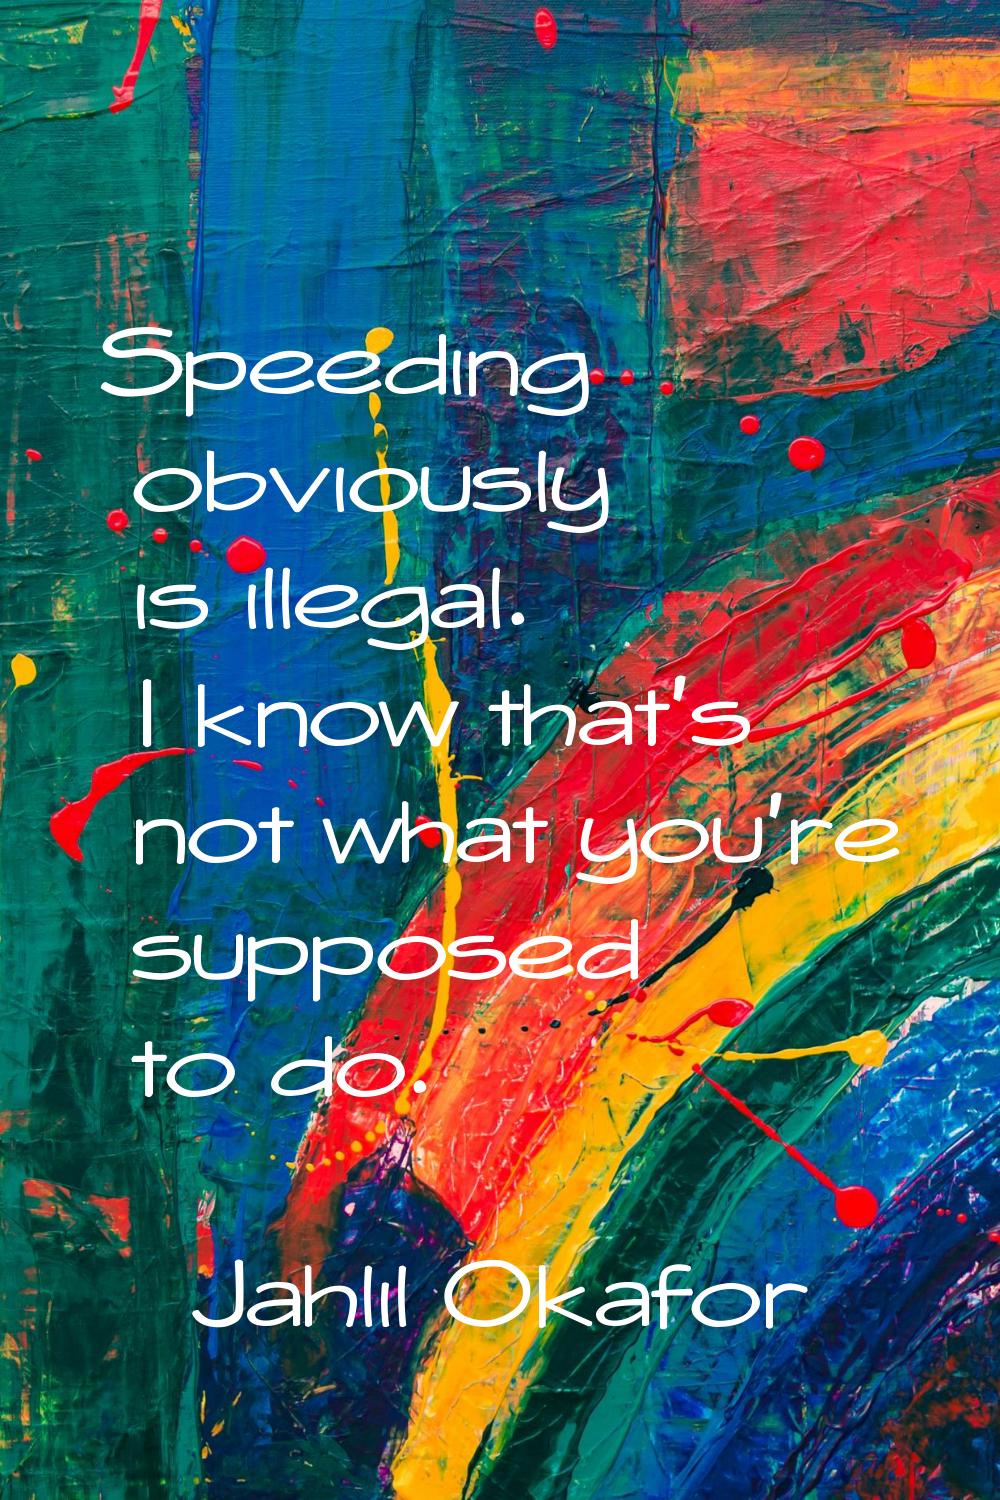 Speeding obviously is illegal. I know that's not what you're supposed to do.